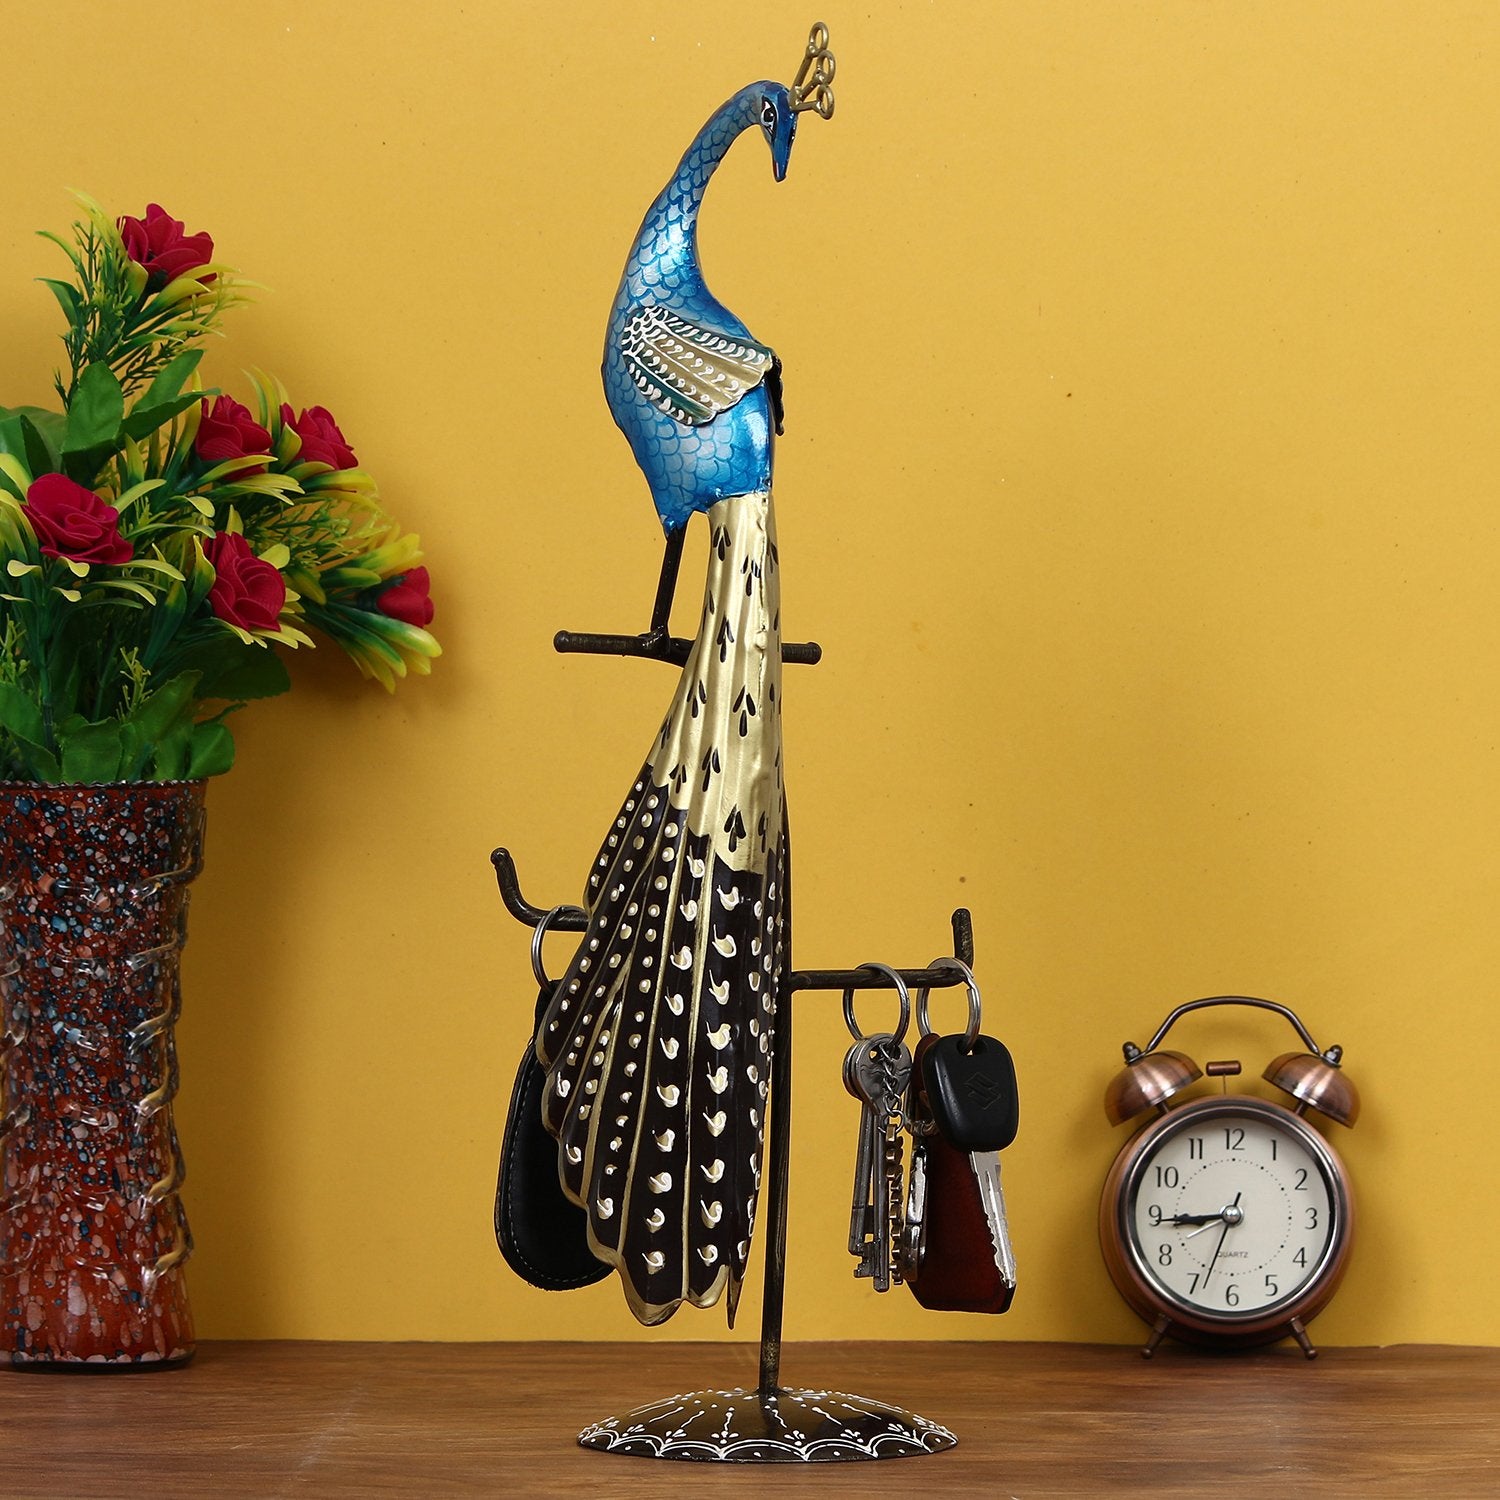 Colorful Peacock Handcrafted Iron Decorative Showpiece